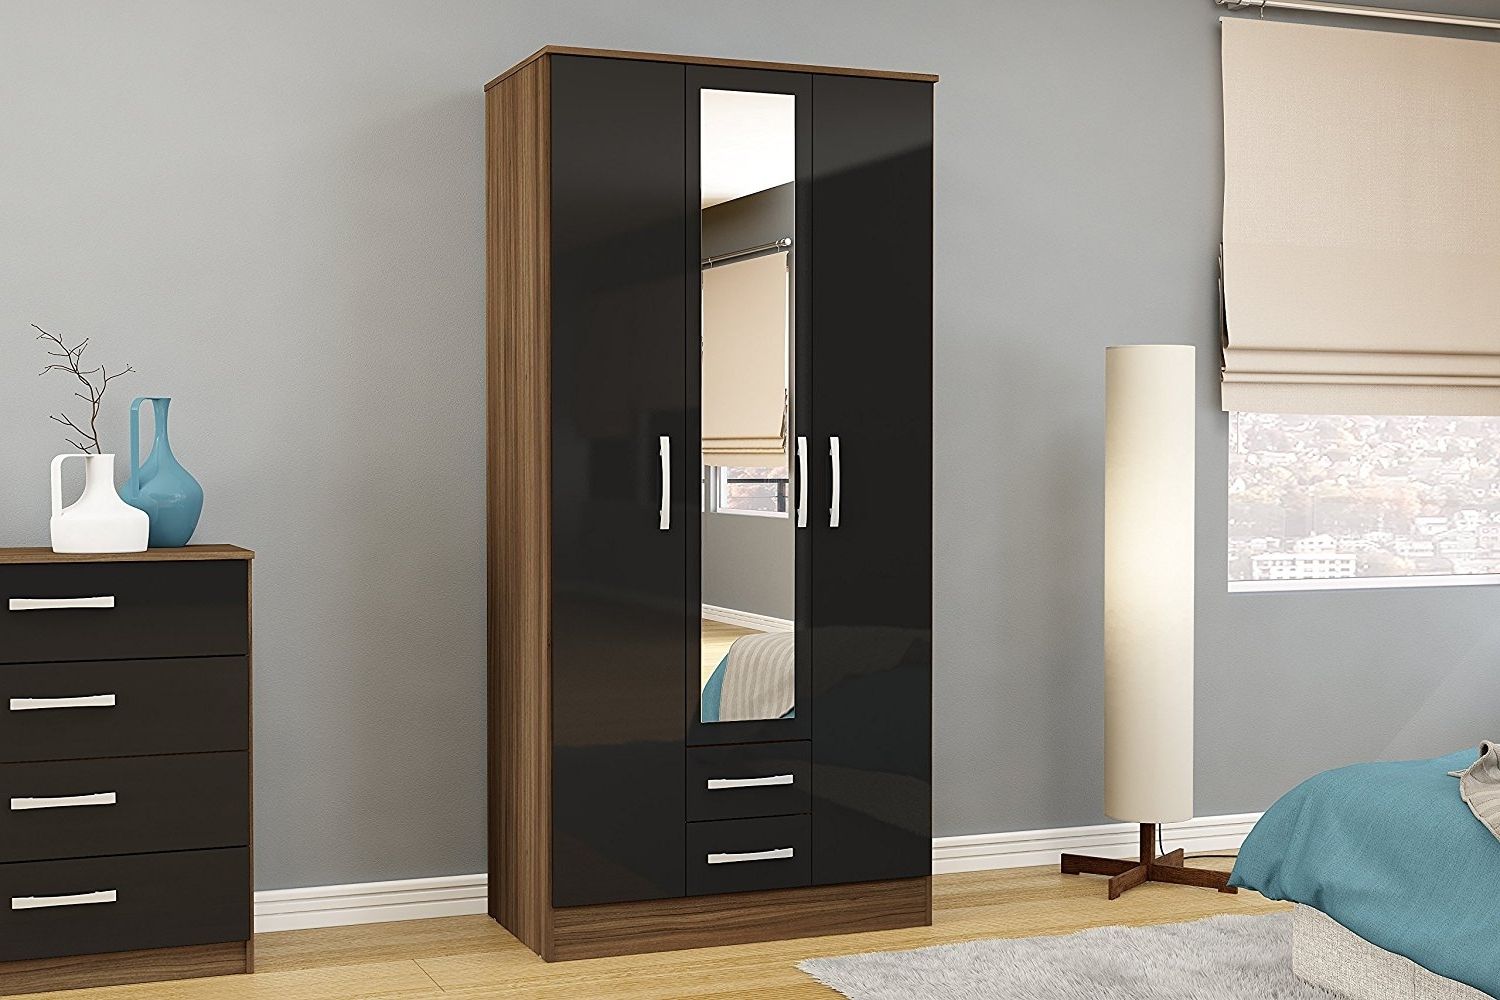 Popular Birlea Lynx 3 Door 2 Drawer Wardrobe With Mirror – High Gloss Throughout Wardrobes With Mirror And Drawers (View 9 of 15)